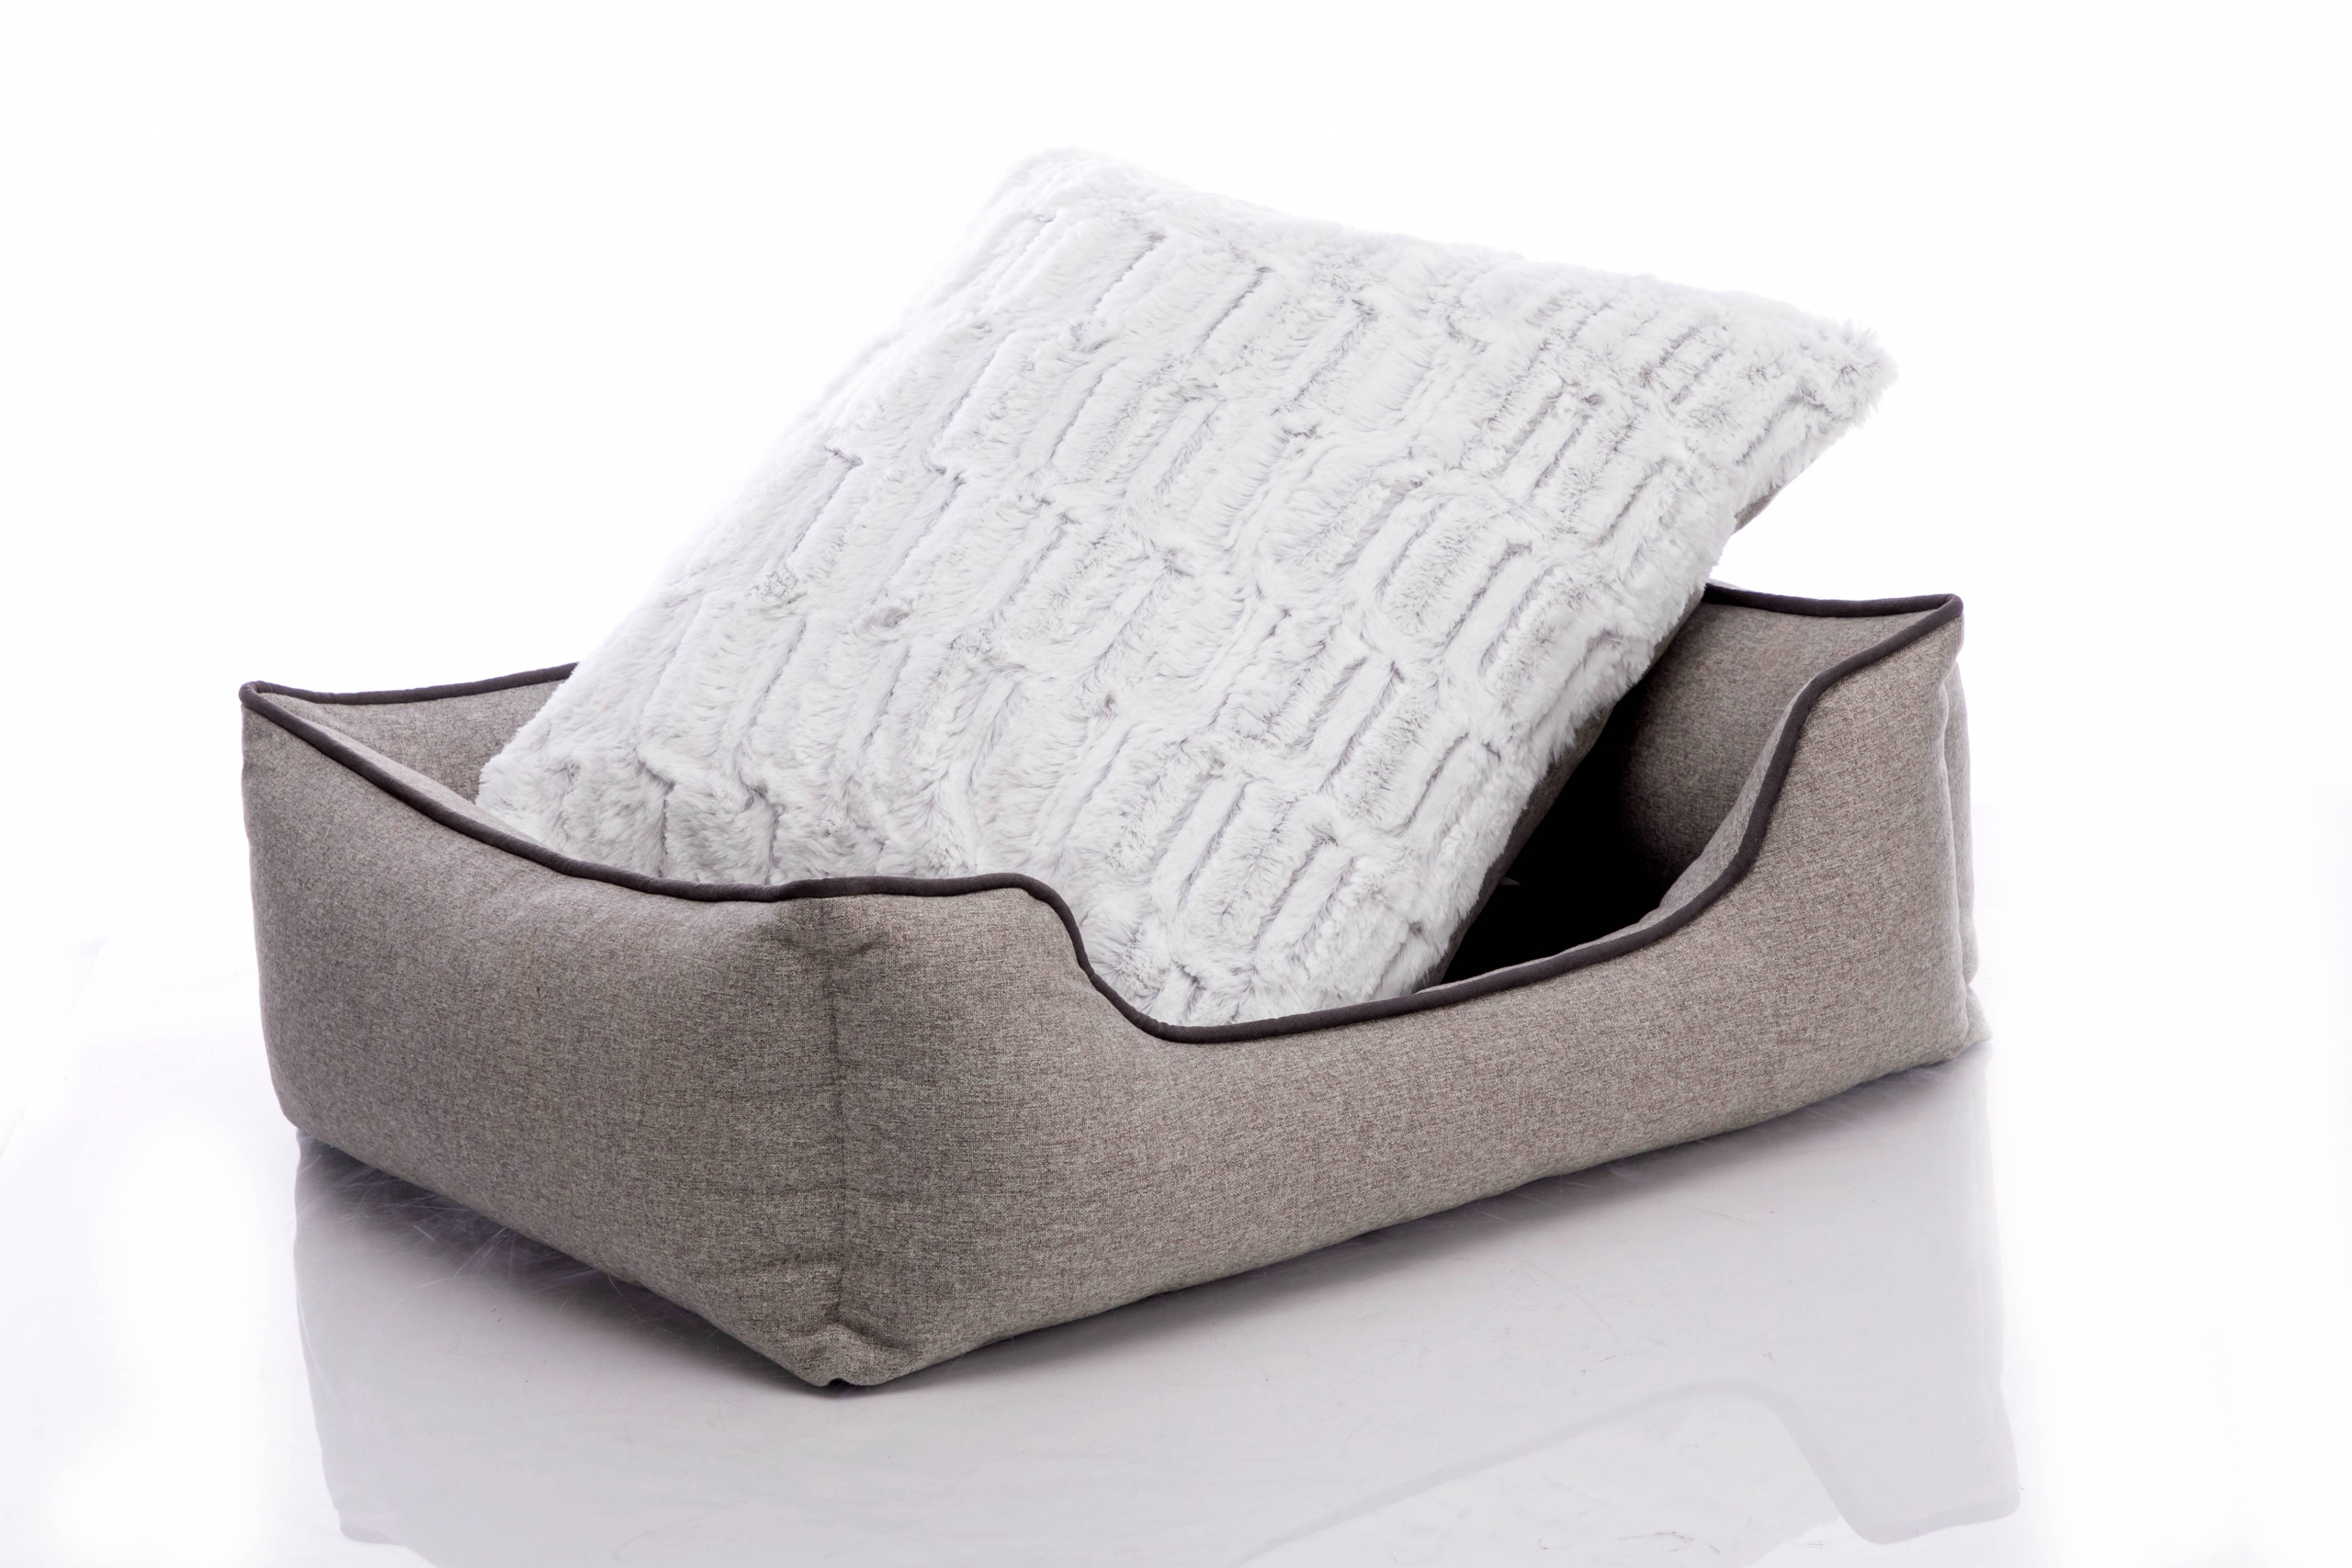 Directly Cover Removeable Washable Rectangular Luxory Pet Bed